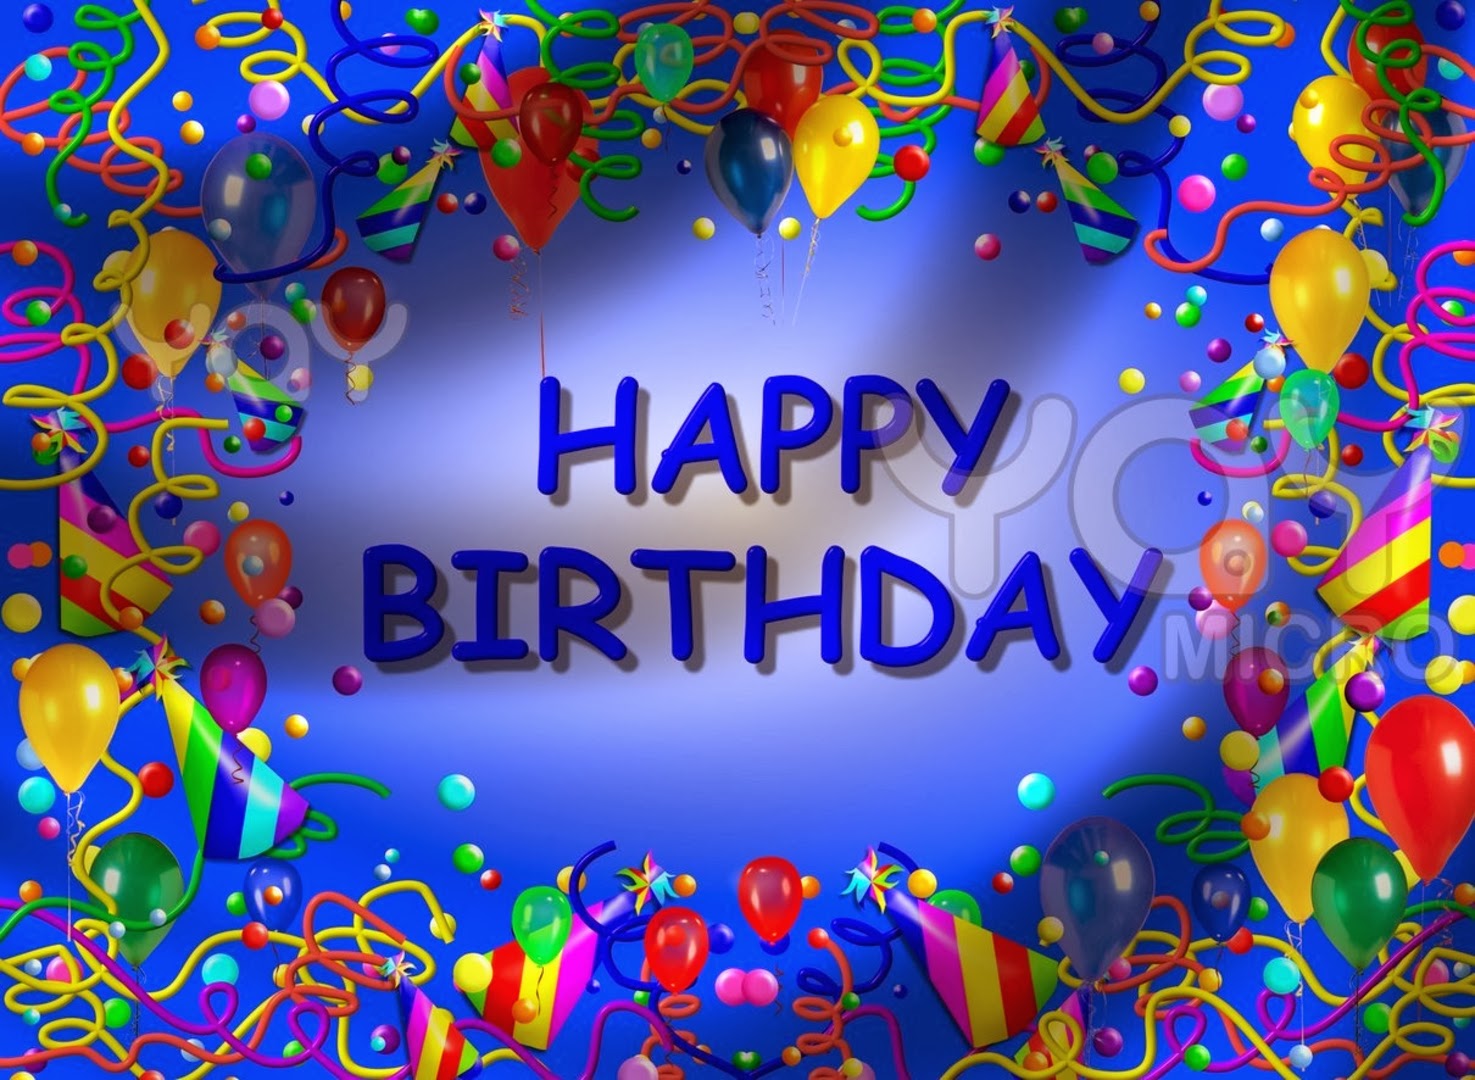 free-download-happy-birthday-wallpaper-free-download-unique-wallpapers